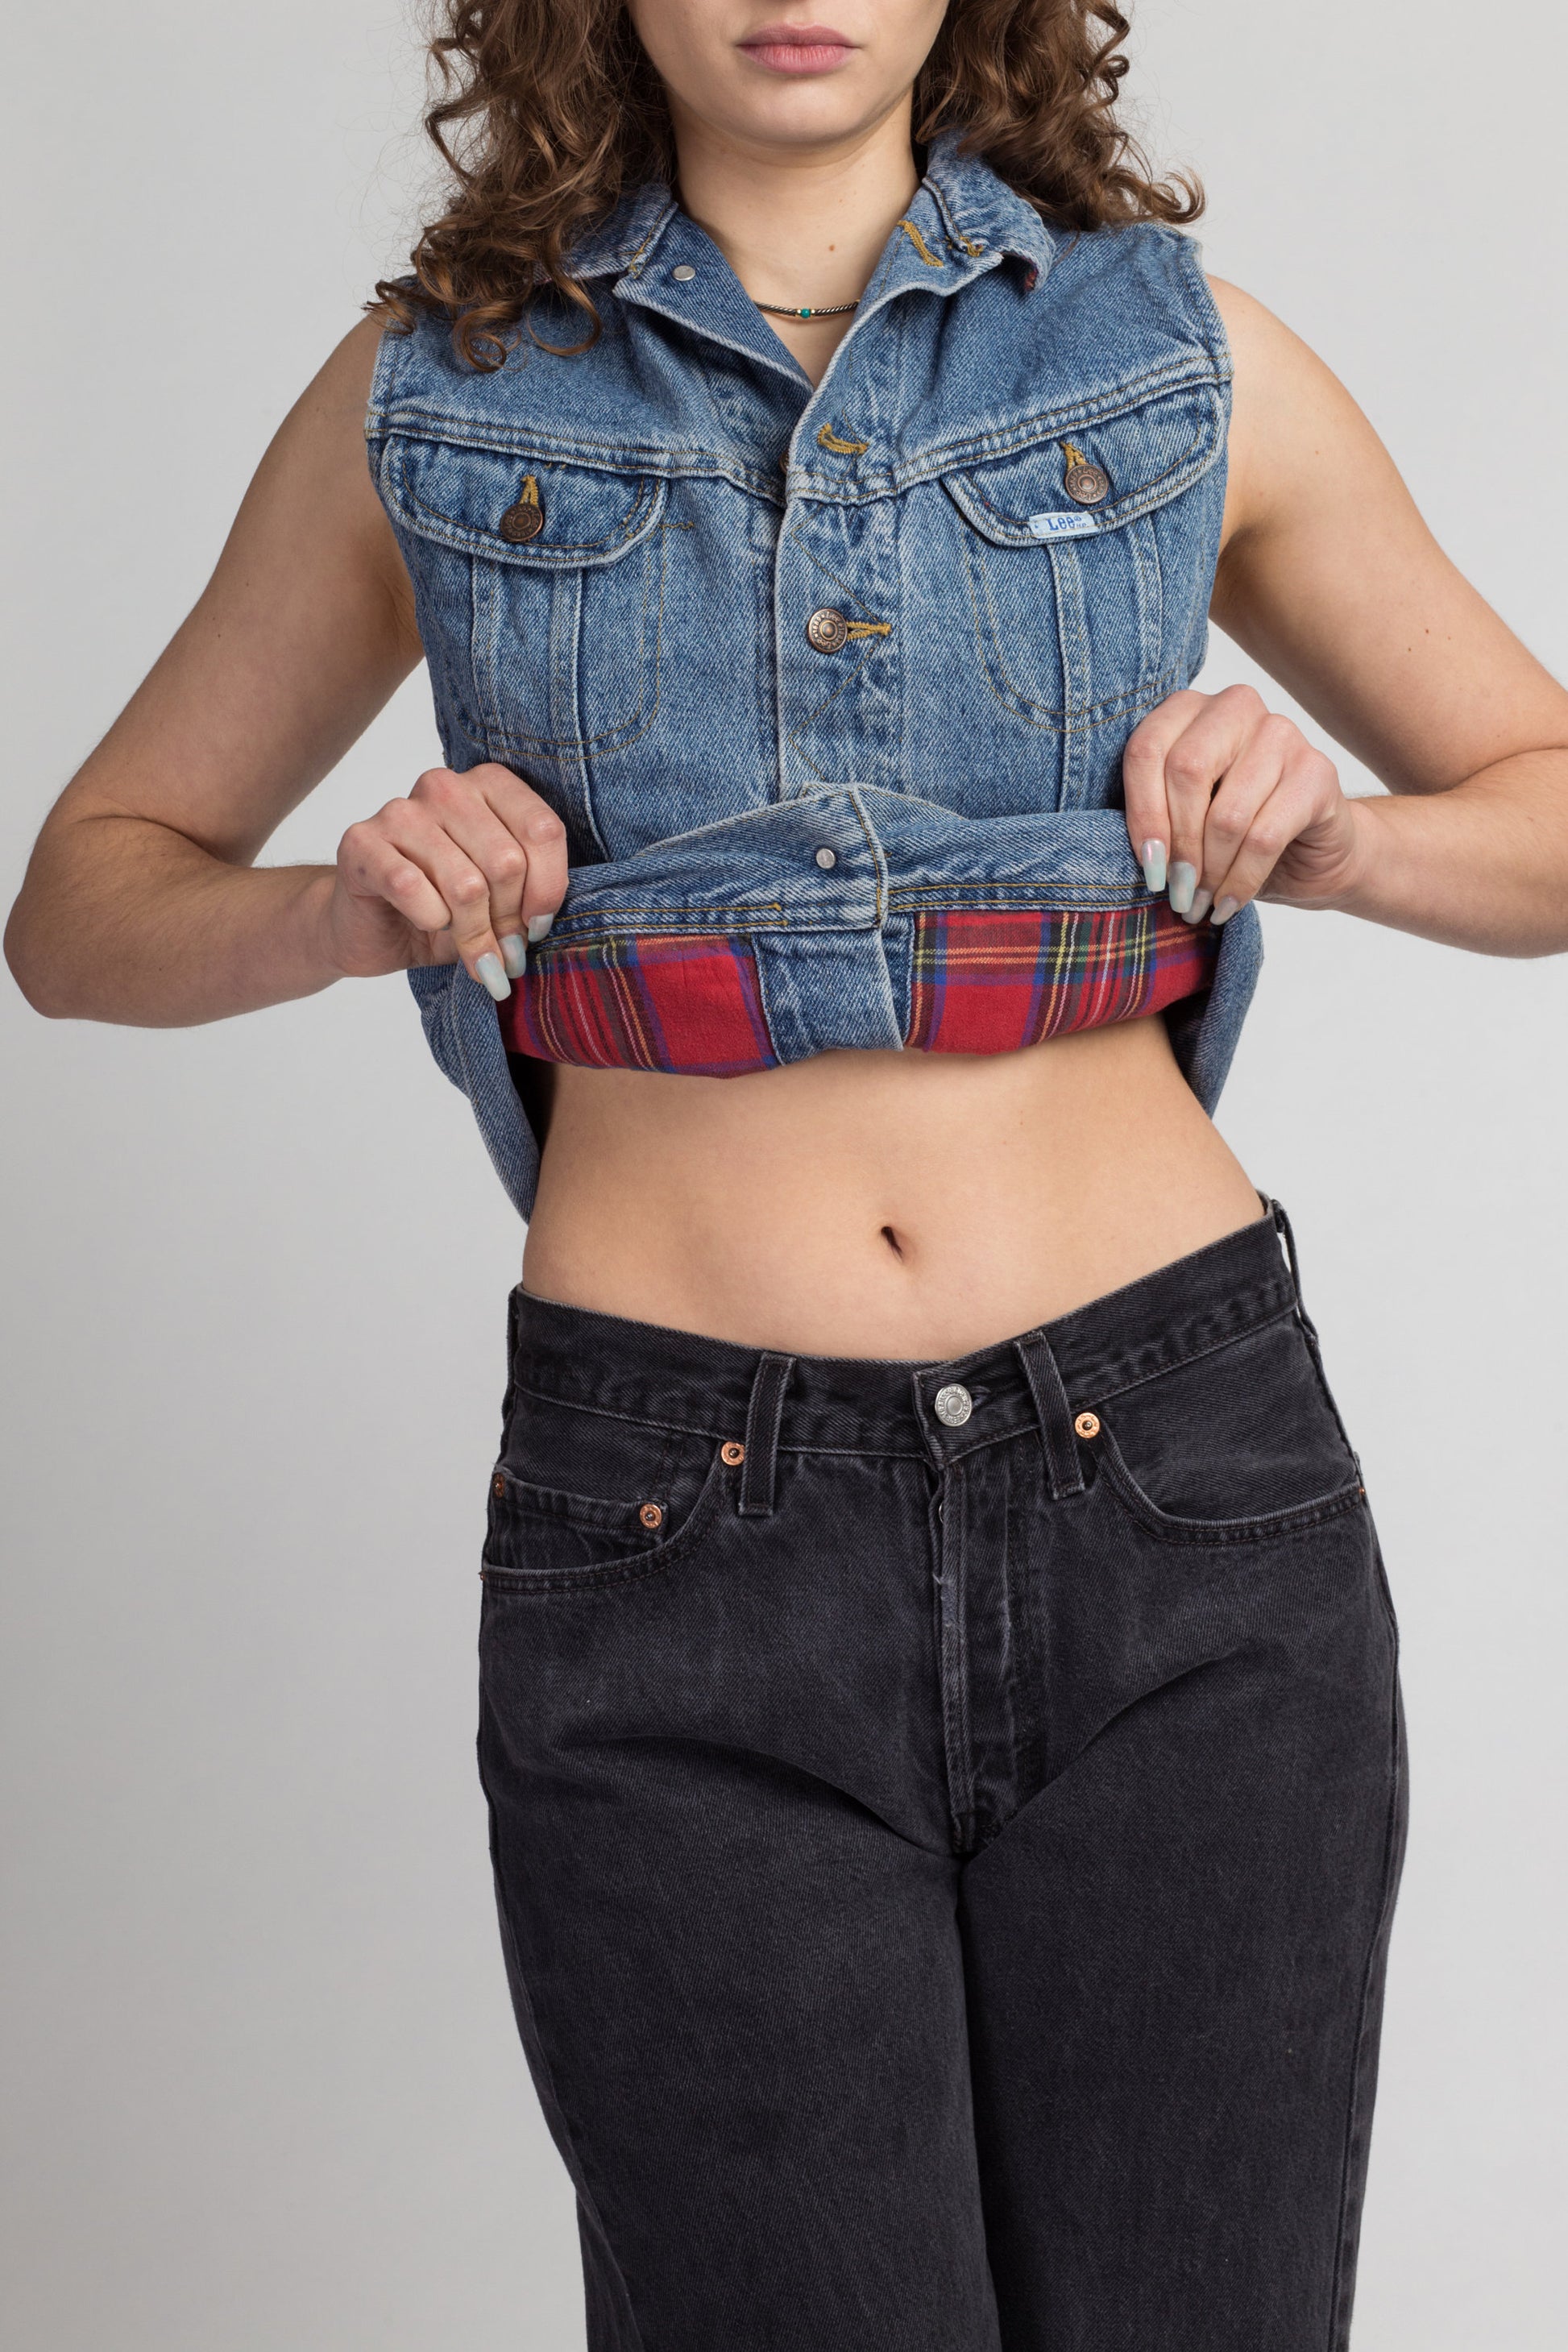 90s Lee Flannel-Lined Denim Vest - Small | Vintage Blue Jean Sleeveless Button Up Cropped Top